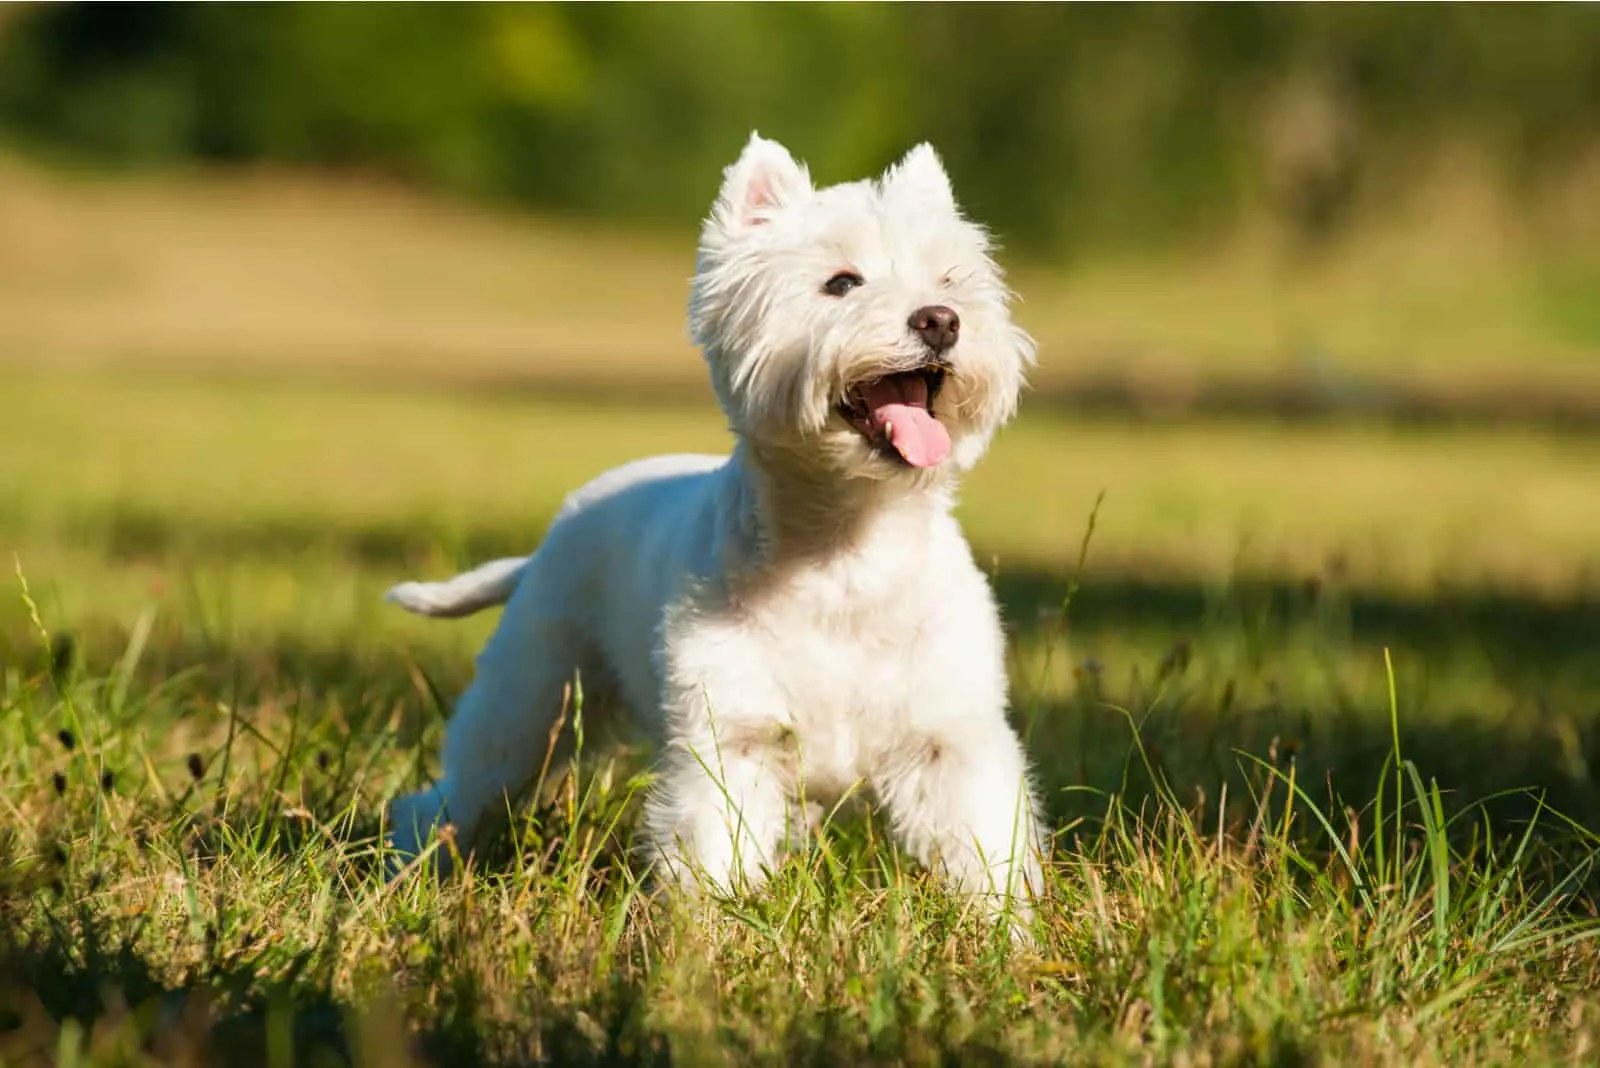 West Highland White Terrier standing on grass outside